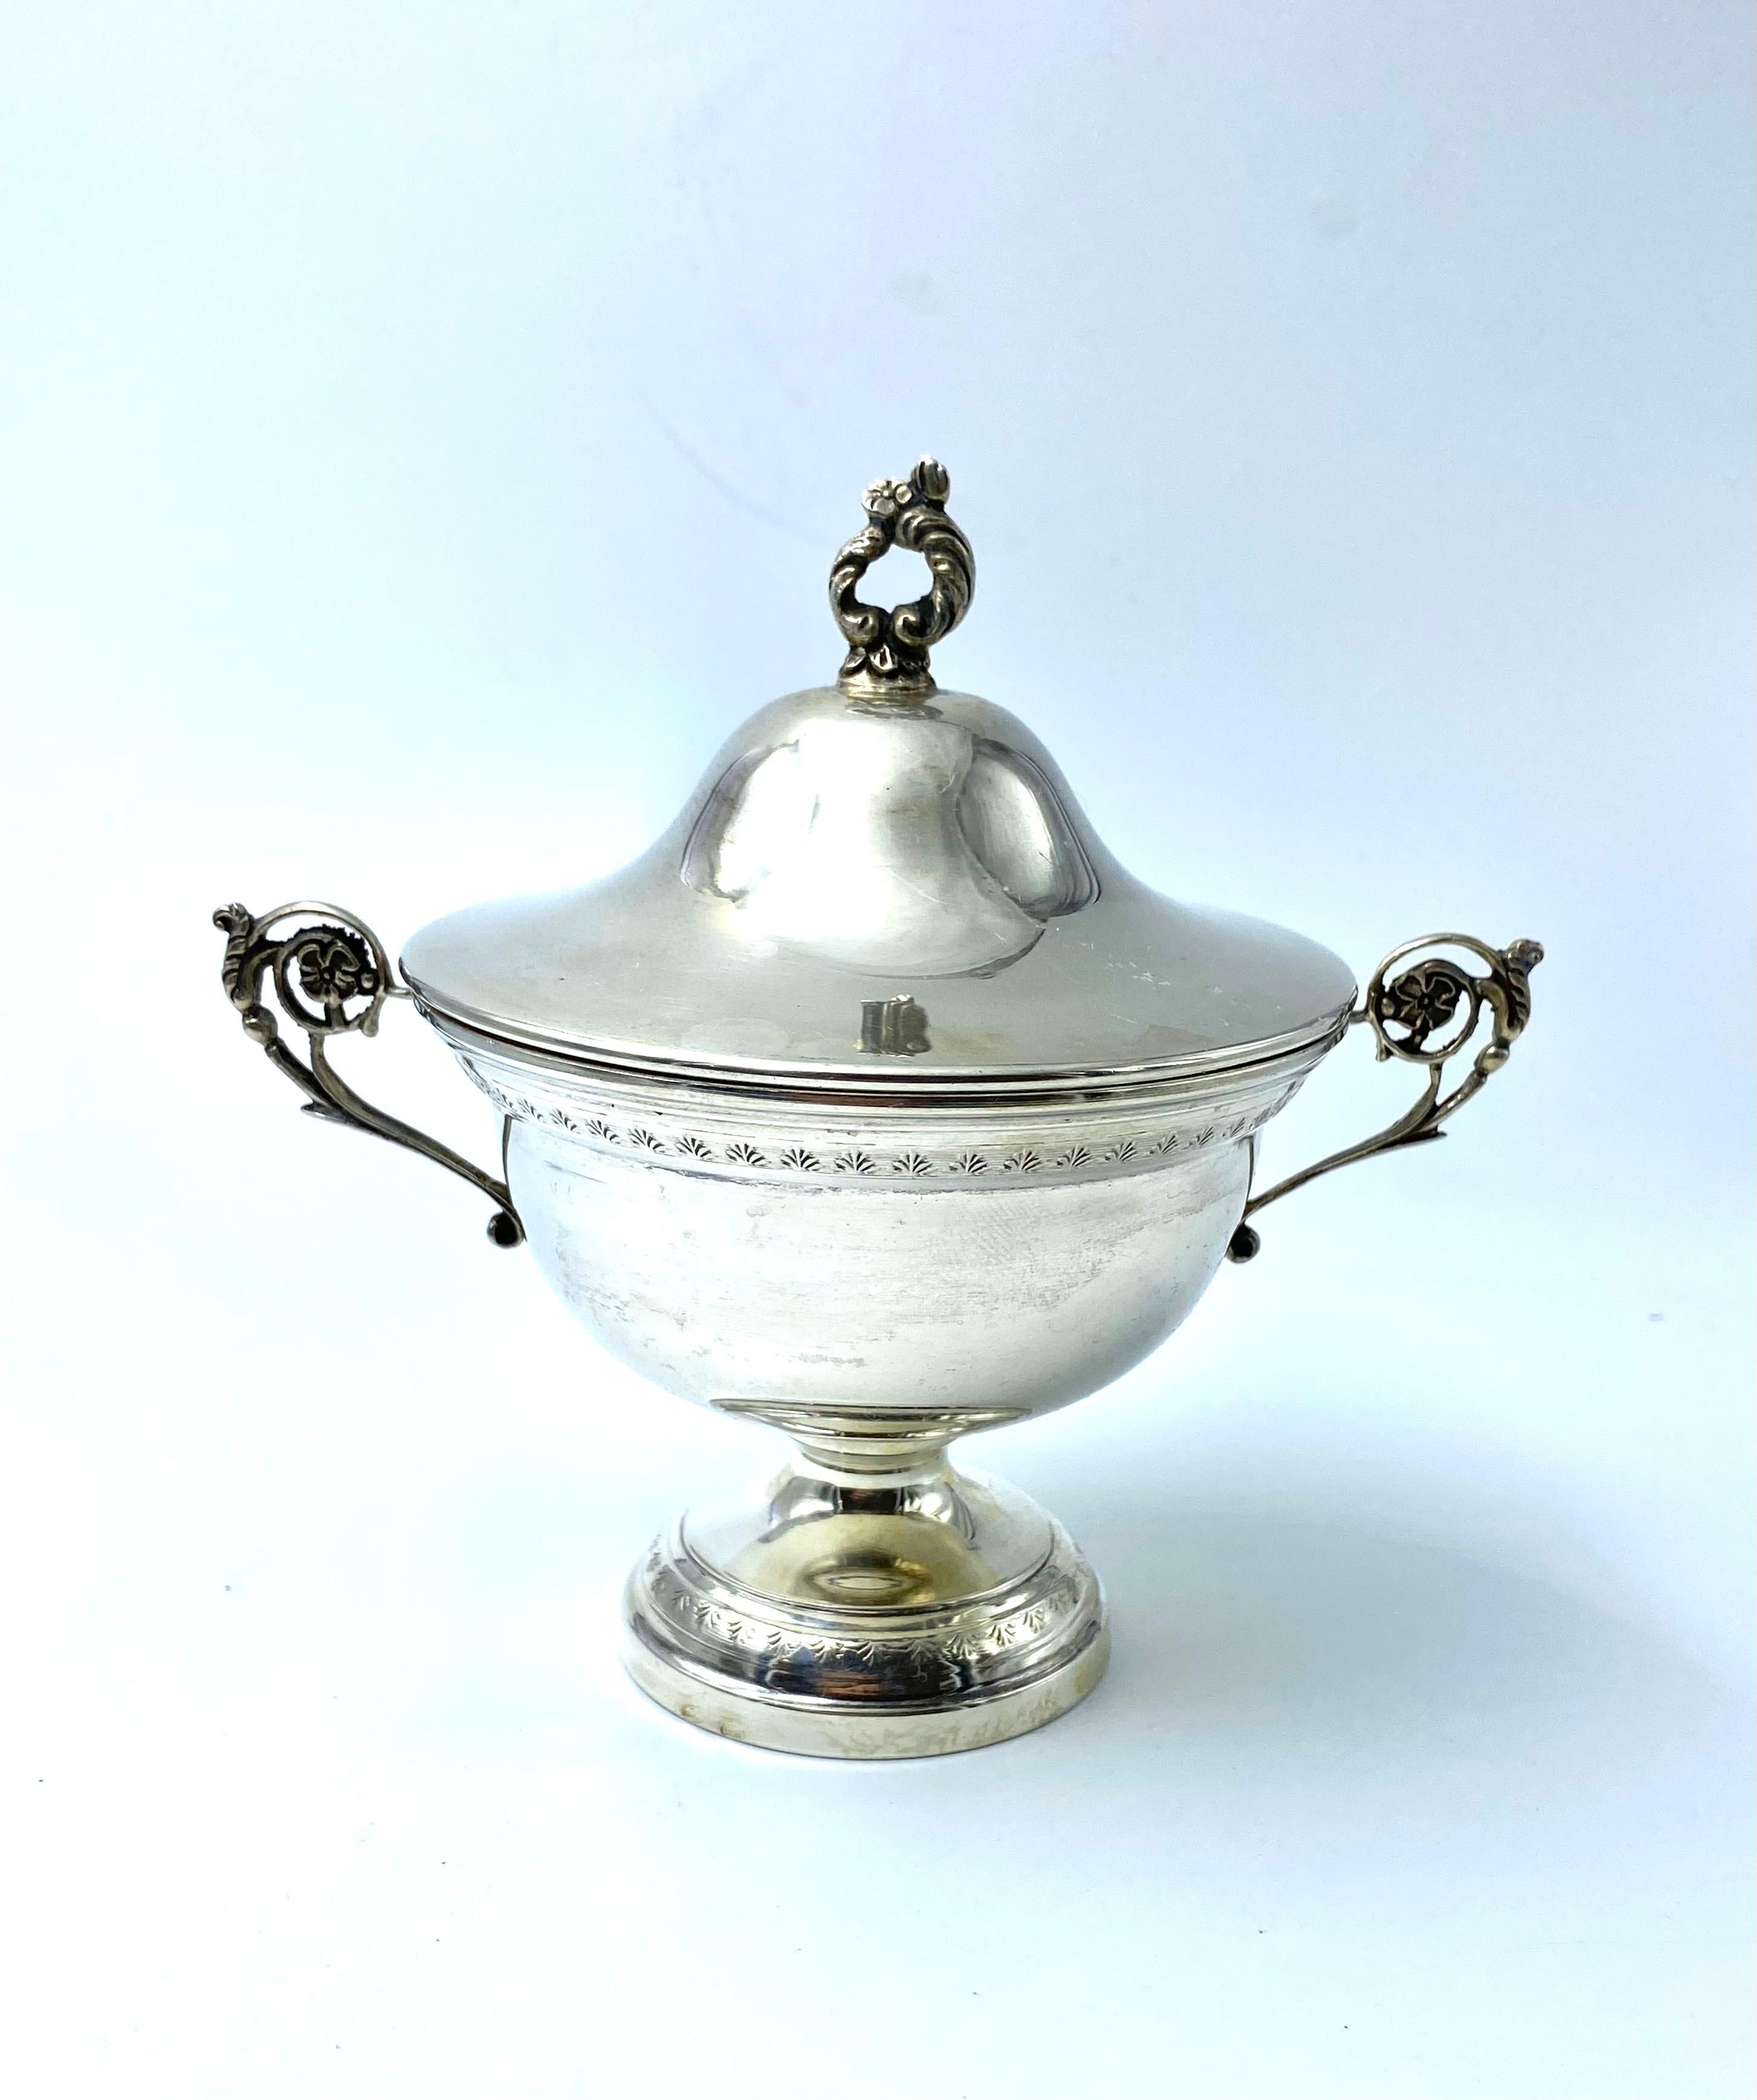 Fine polychrome porcelain coffee service consisting of 6 cups enclosed in silver shells, delightfully crafted in art nouveau style, made by the Hutshenreuther company of Hohenberg, Germany, dated 1914. A sugar bowl, also made of silver, completes